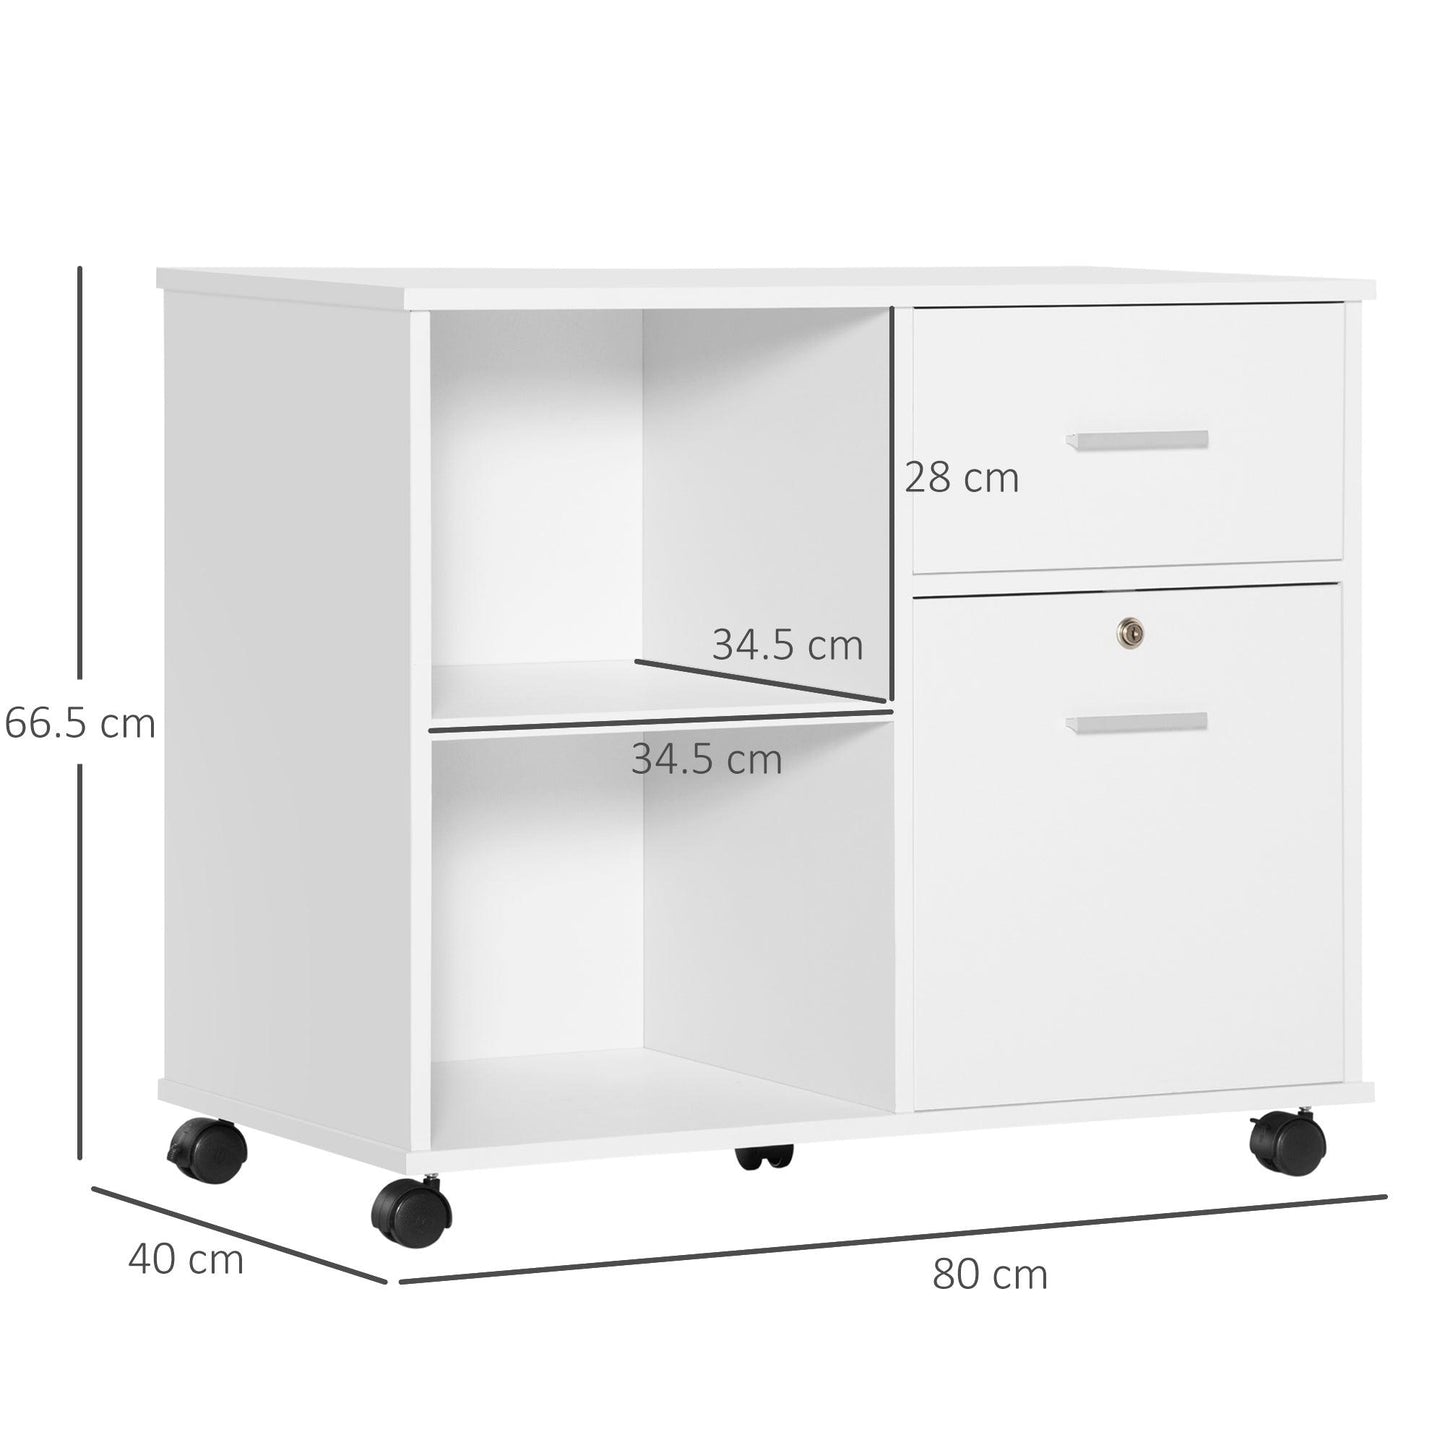 Vinsetto White Filing Cabinet & Printer Stand with Drawers & Shelves - ALL4U RETAILER LTD